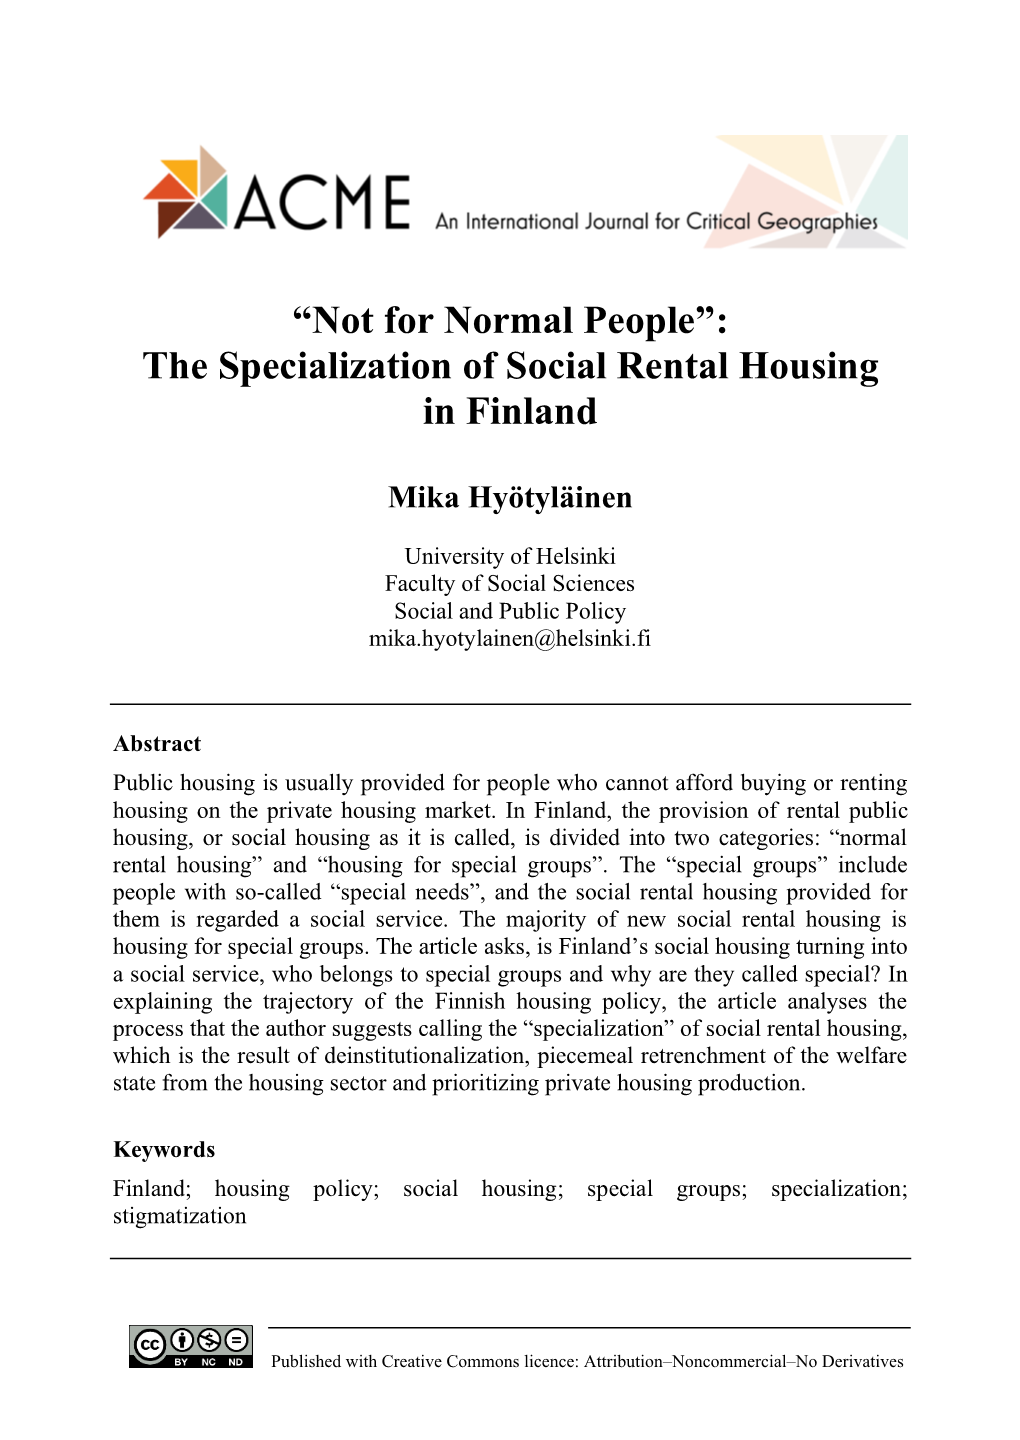 The Specialization of Social Rental Housing in Finland